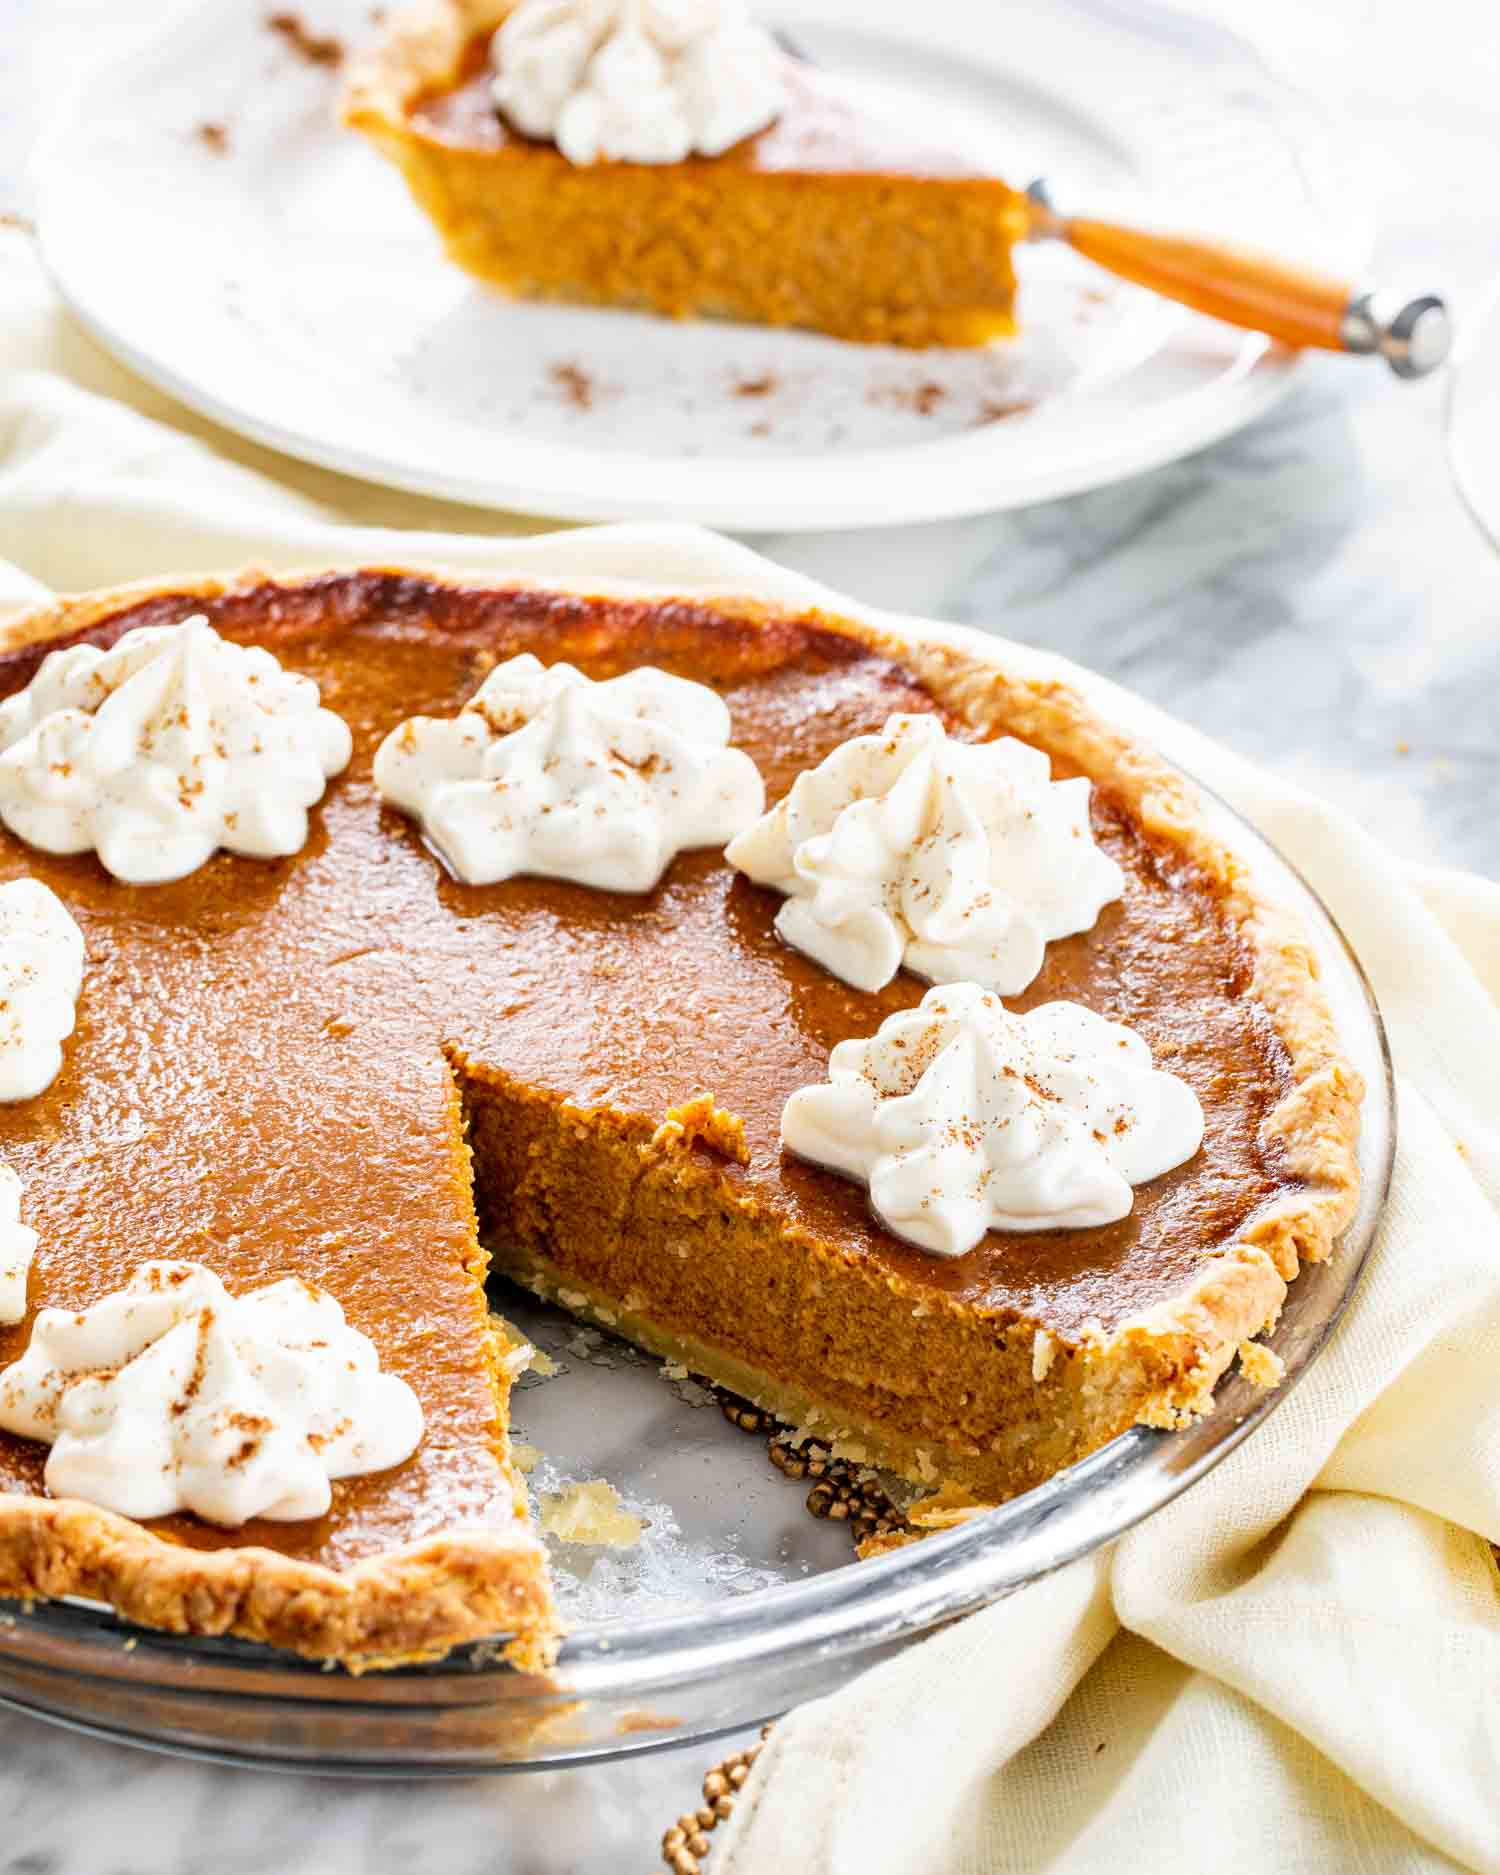 a freshly baked pumpkin pie with whipped cream.